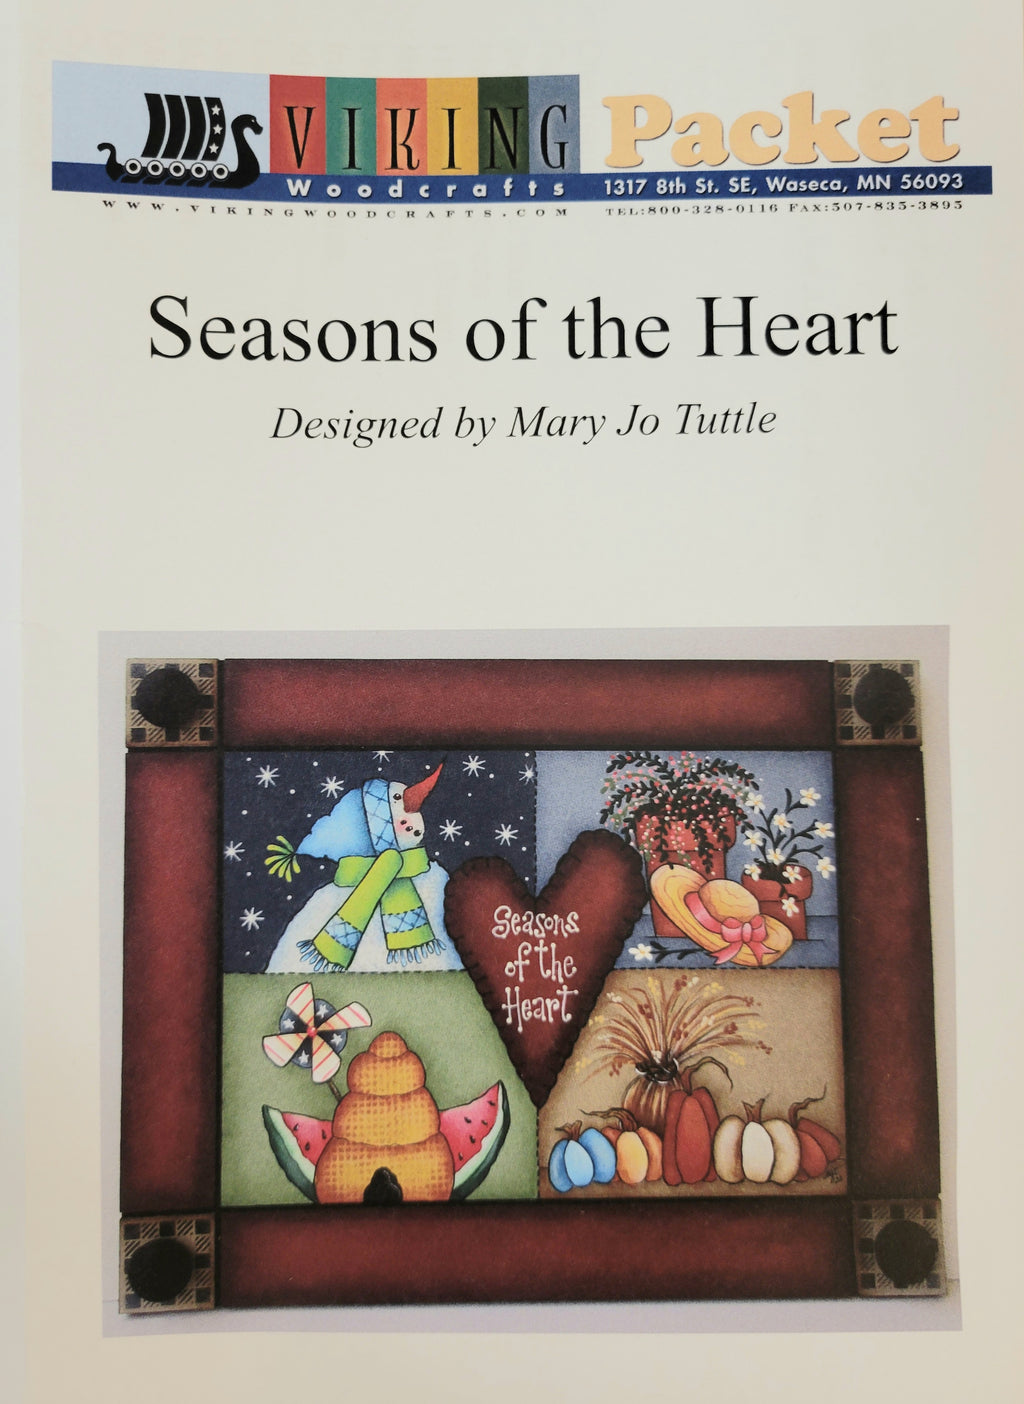 Seasons of the Heart packet by Mary Jo Tuttle